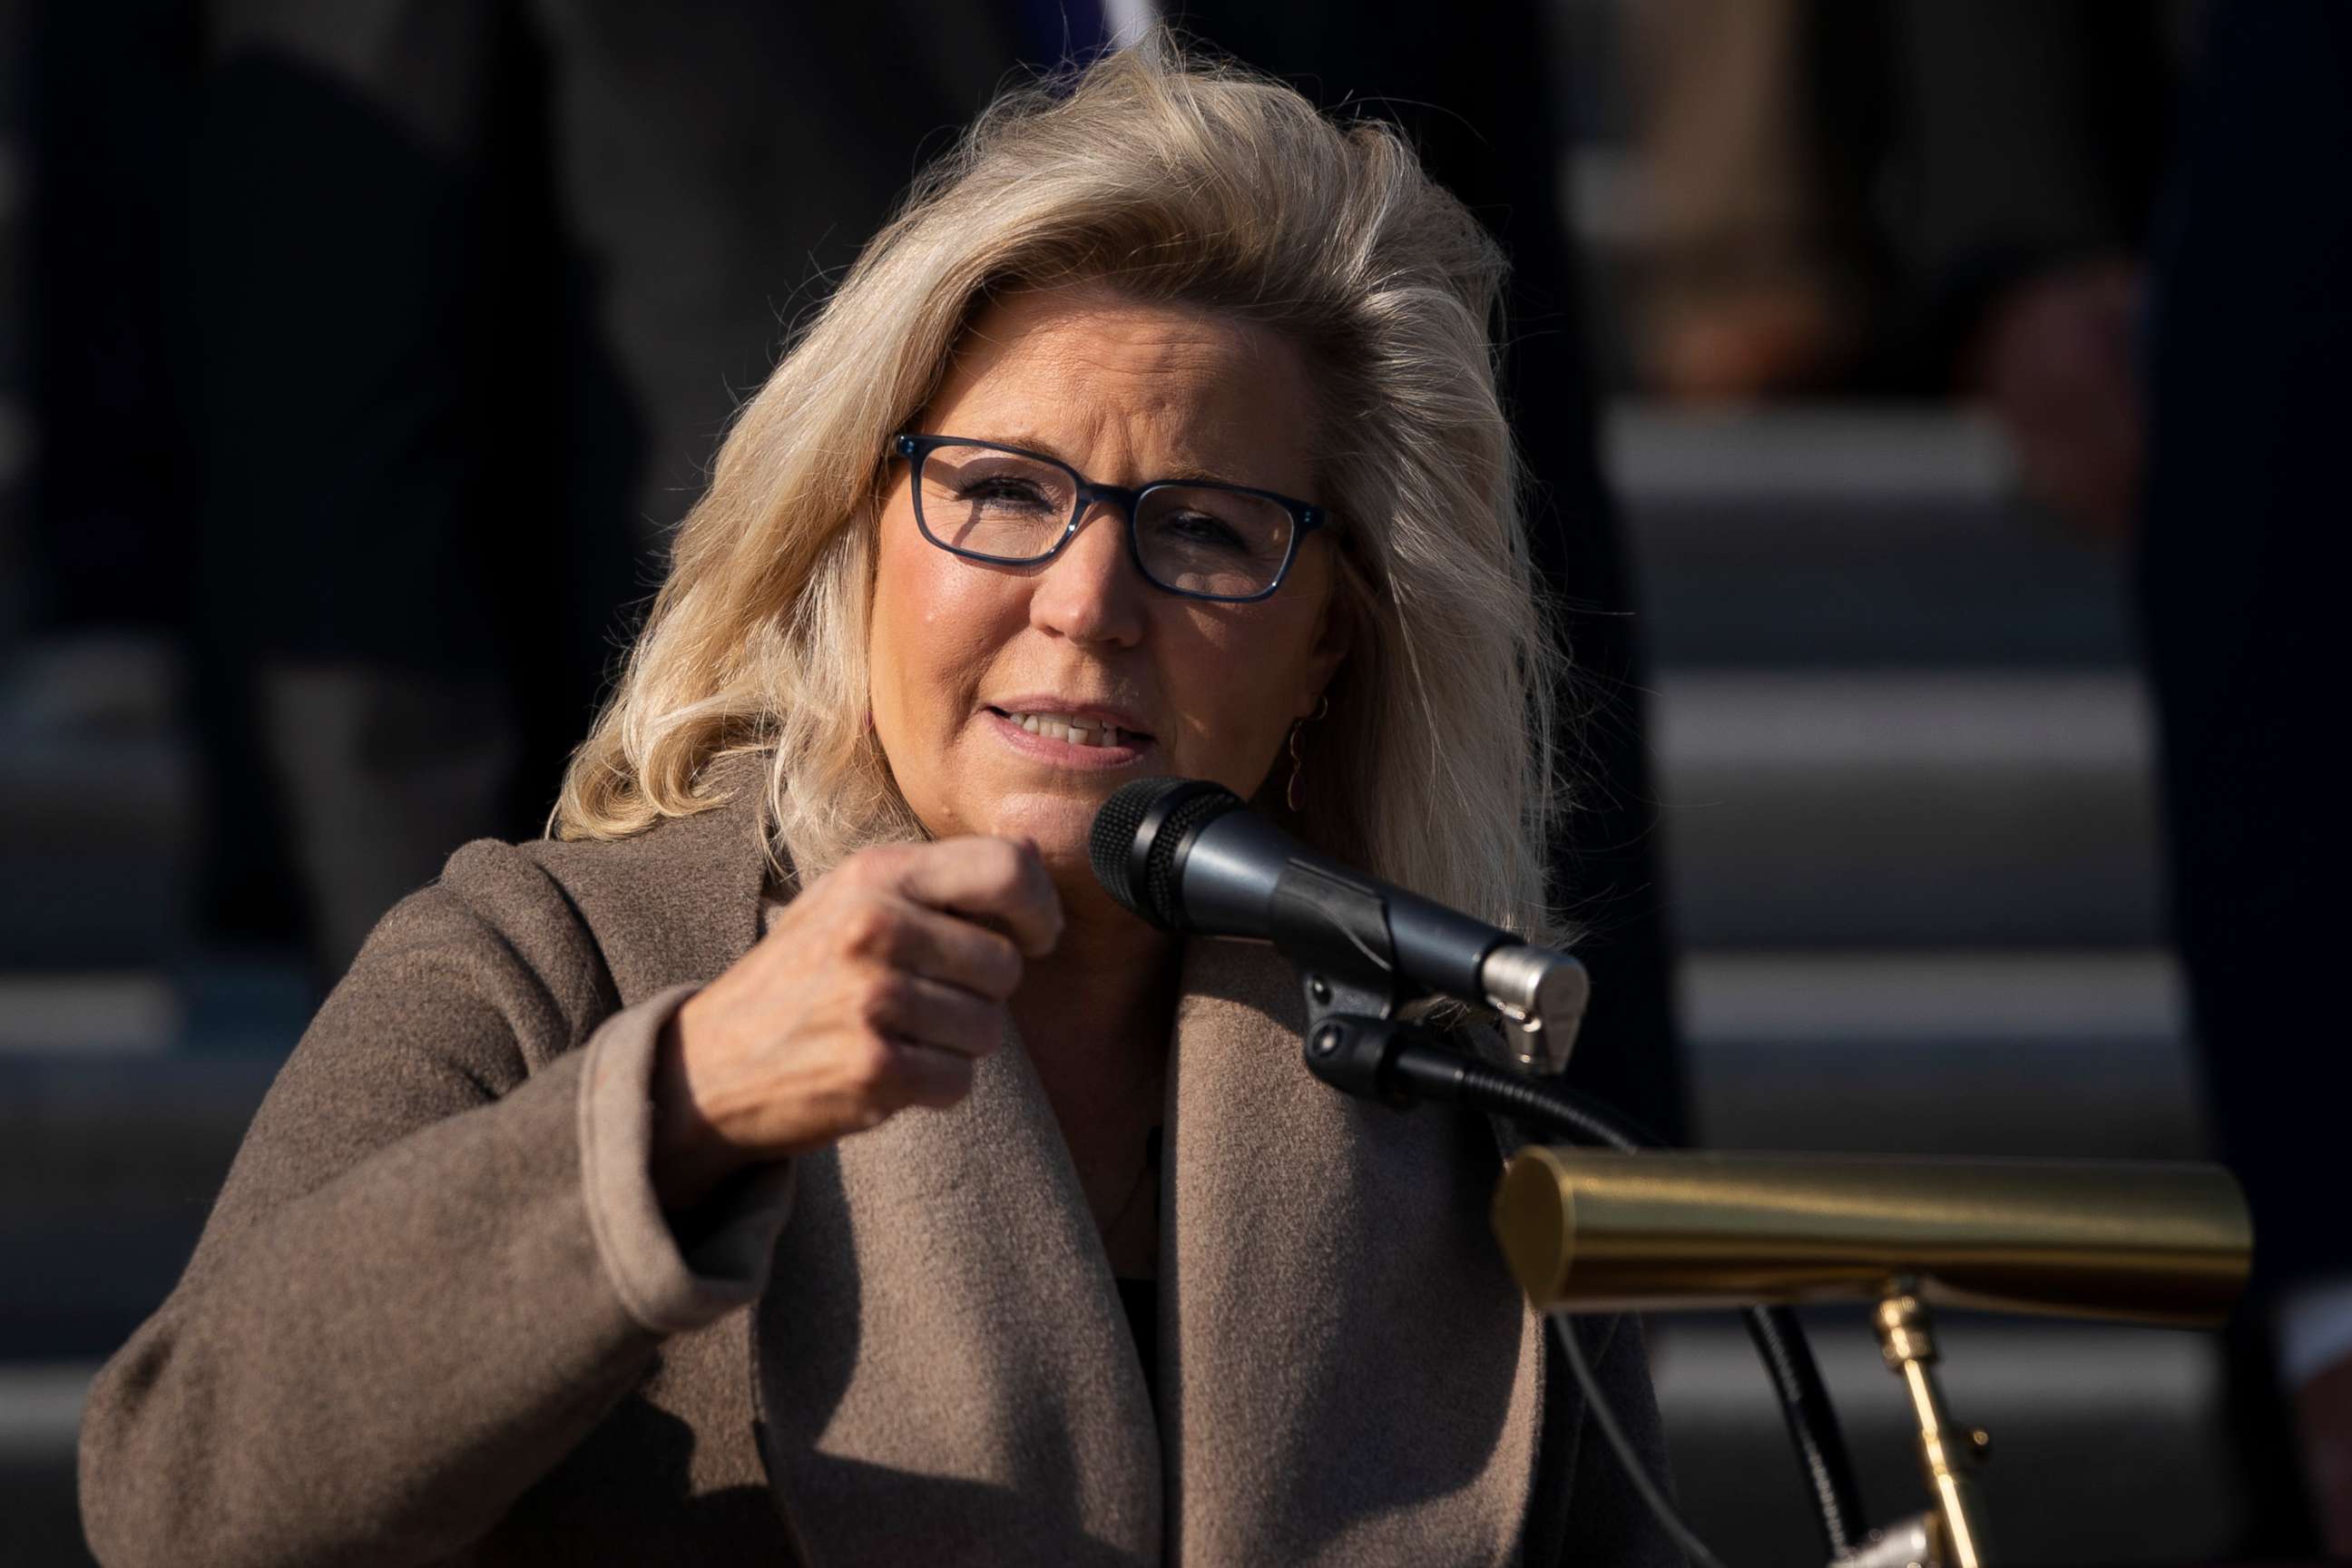 PHOTO: Rep. Liz Cheney speaks during a news conference with fellow House Republicans outside the Capitol, Dec. 10, 2020.